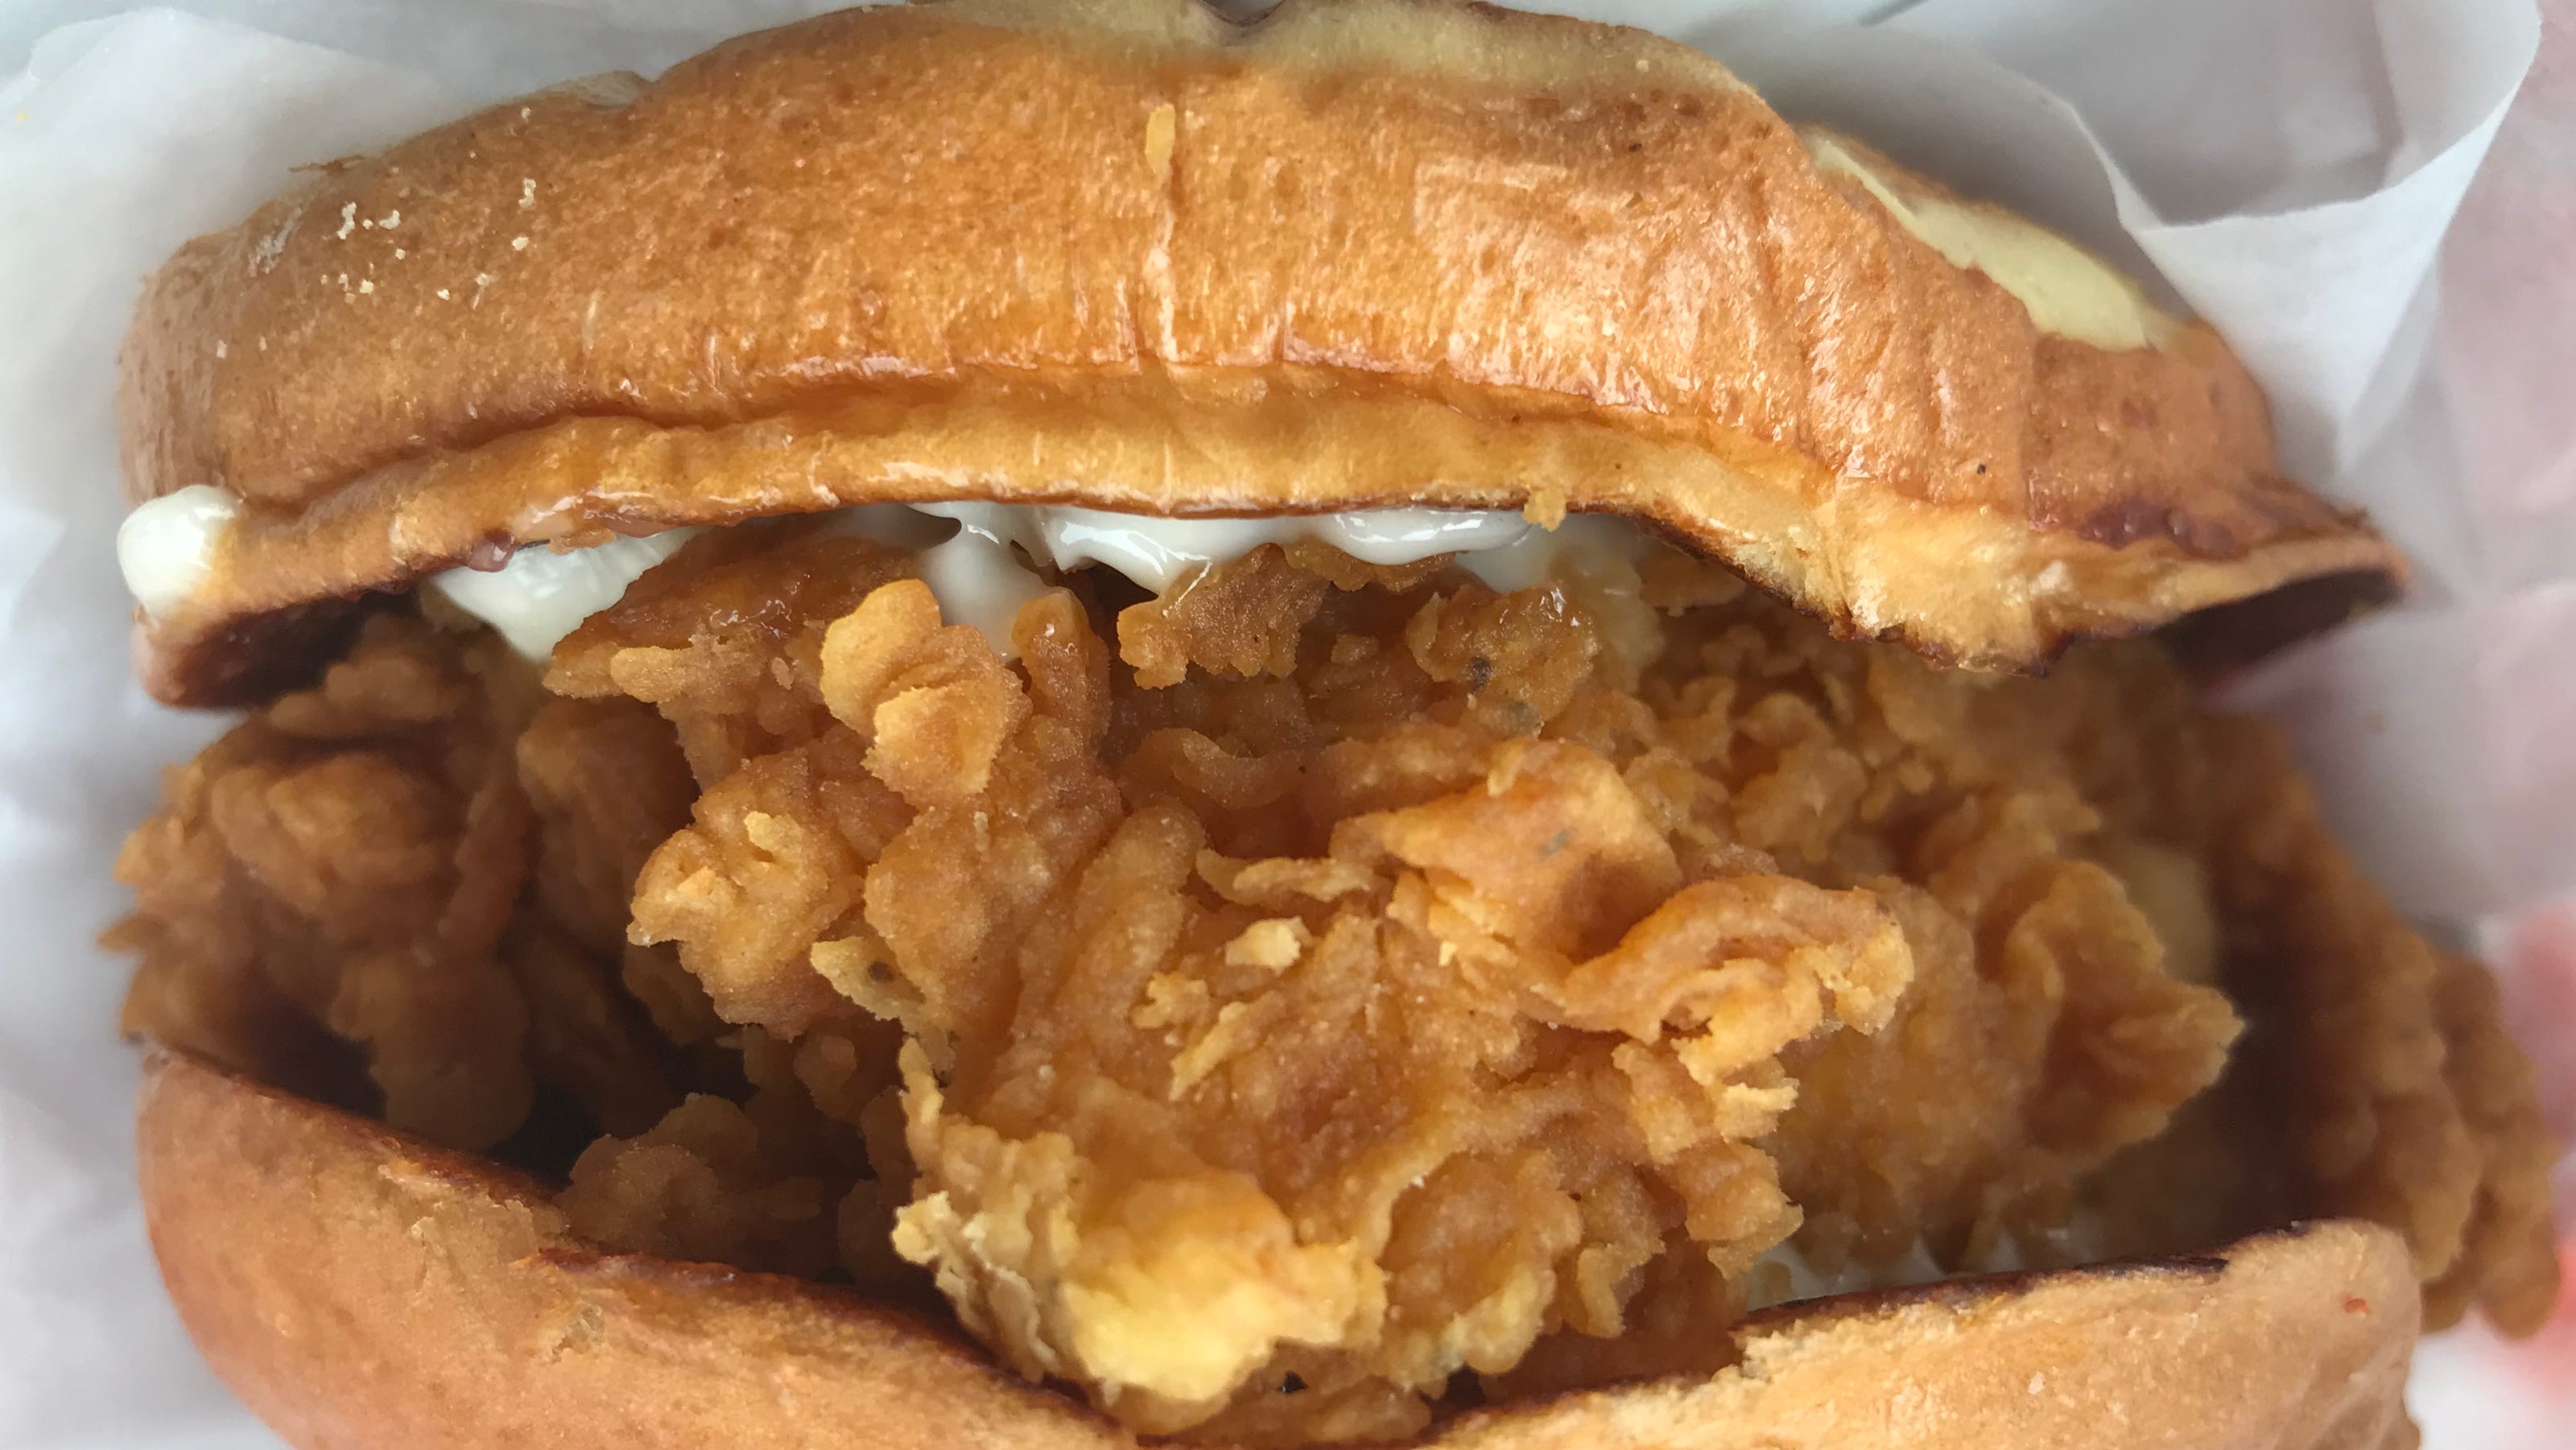 Popeyes chicken sandwich Price and how to get it in Milwaukee